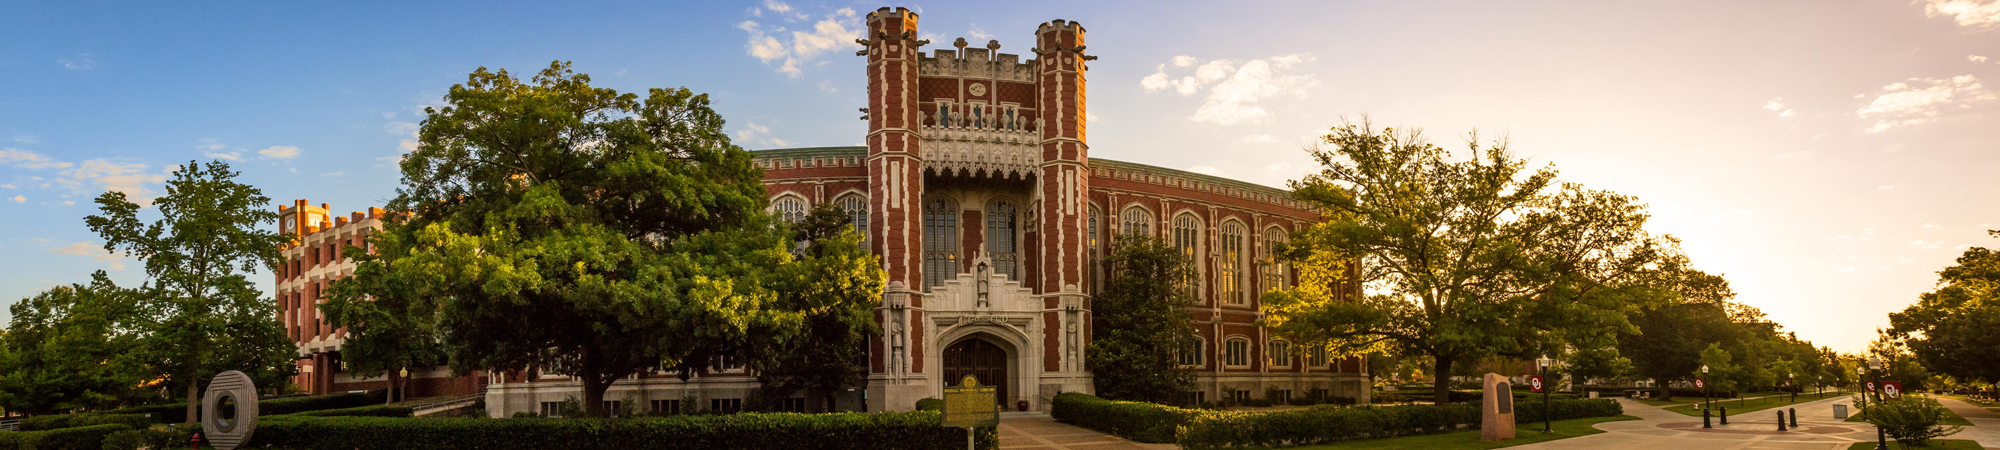 University of Oklahoma campus, Bizzell Memorial Library